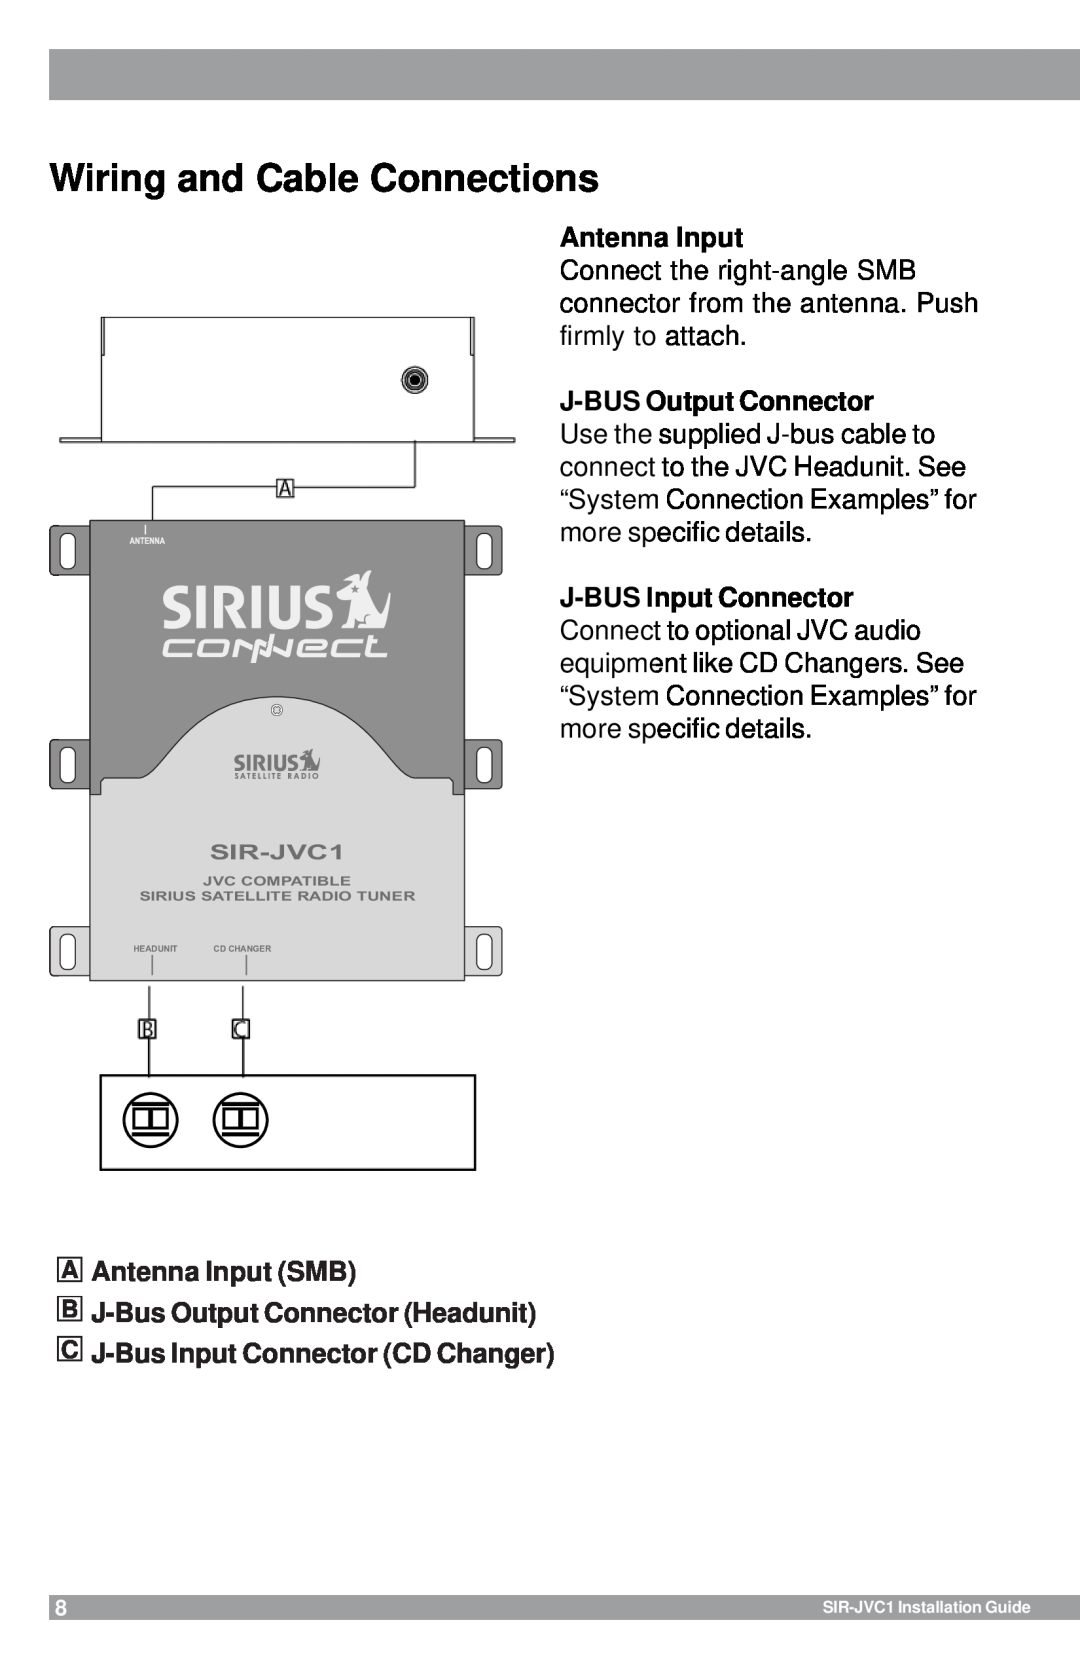 Sirius Satellite Radio SIR-JVC1 manual Wiring and Cable Connections 